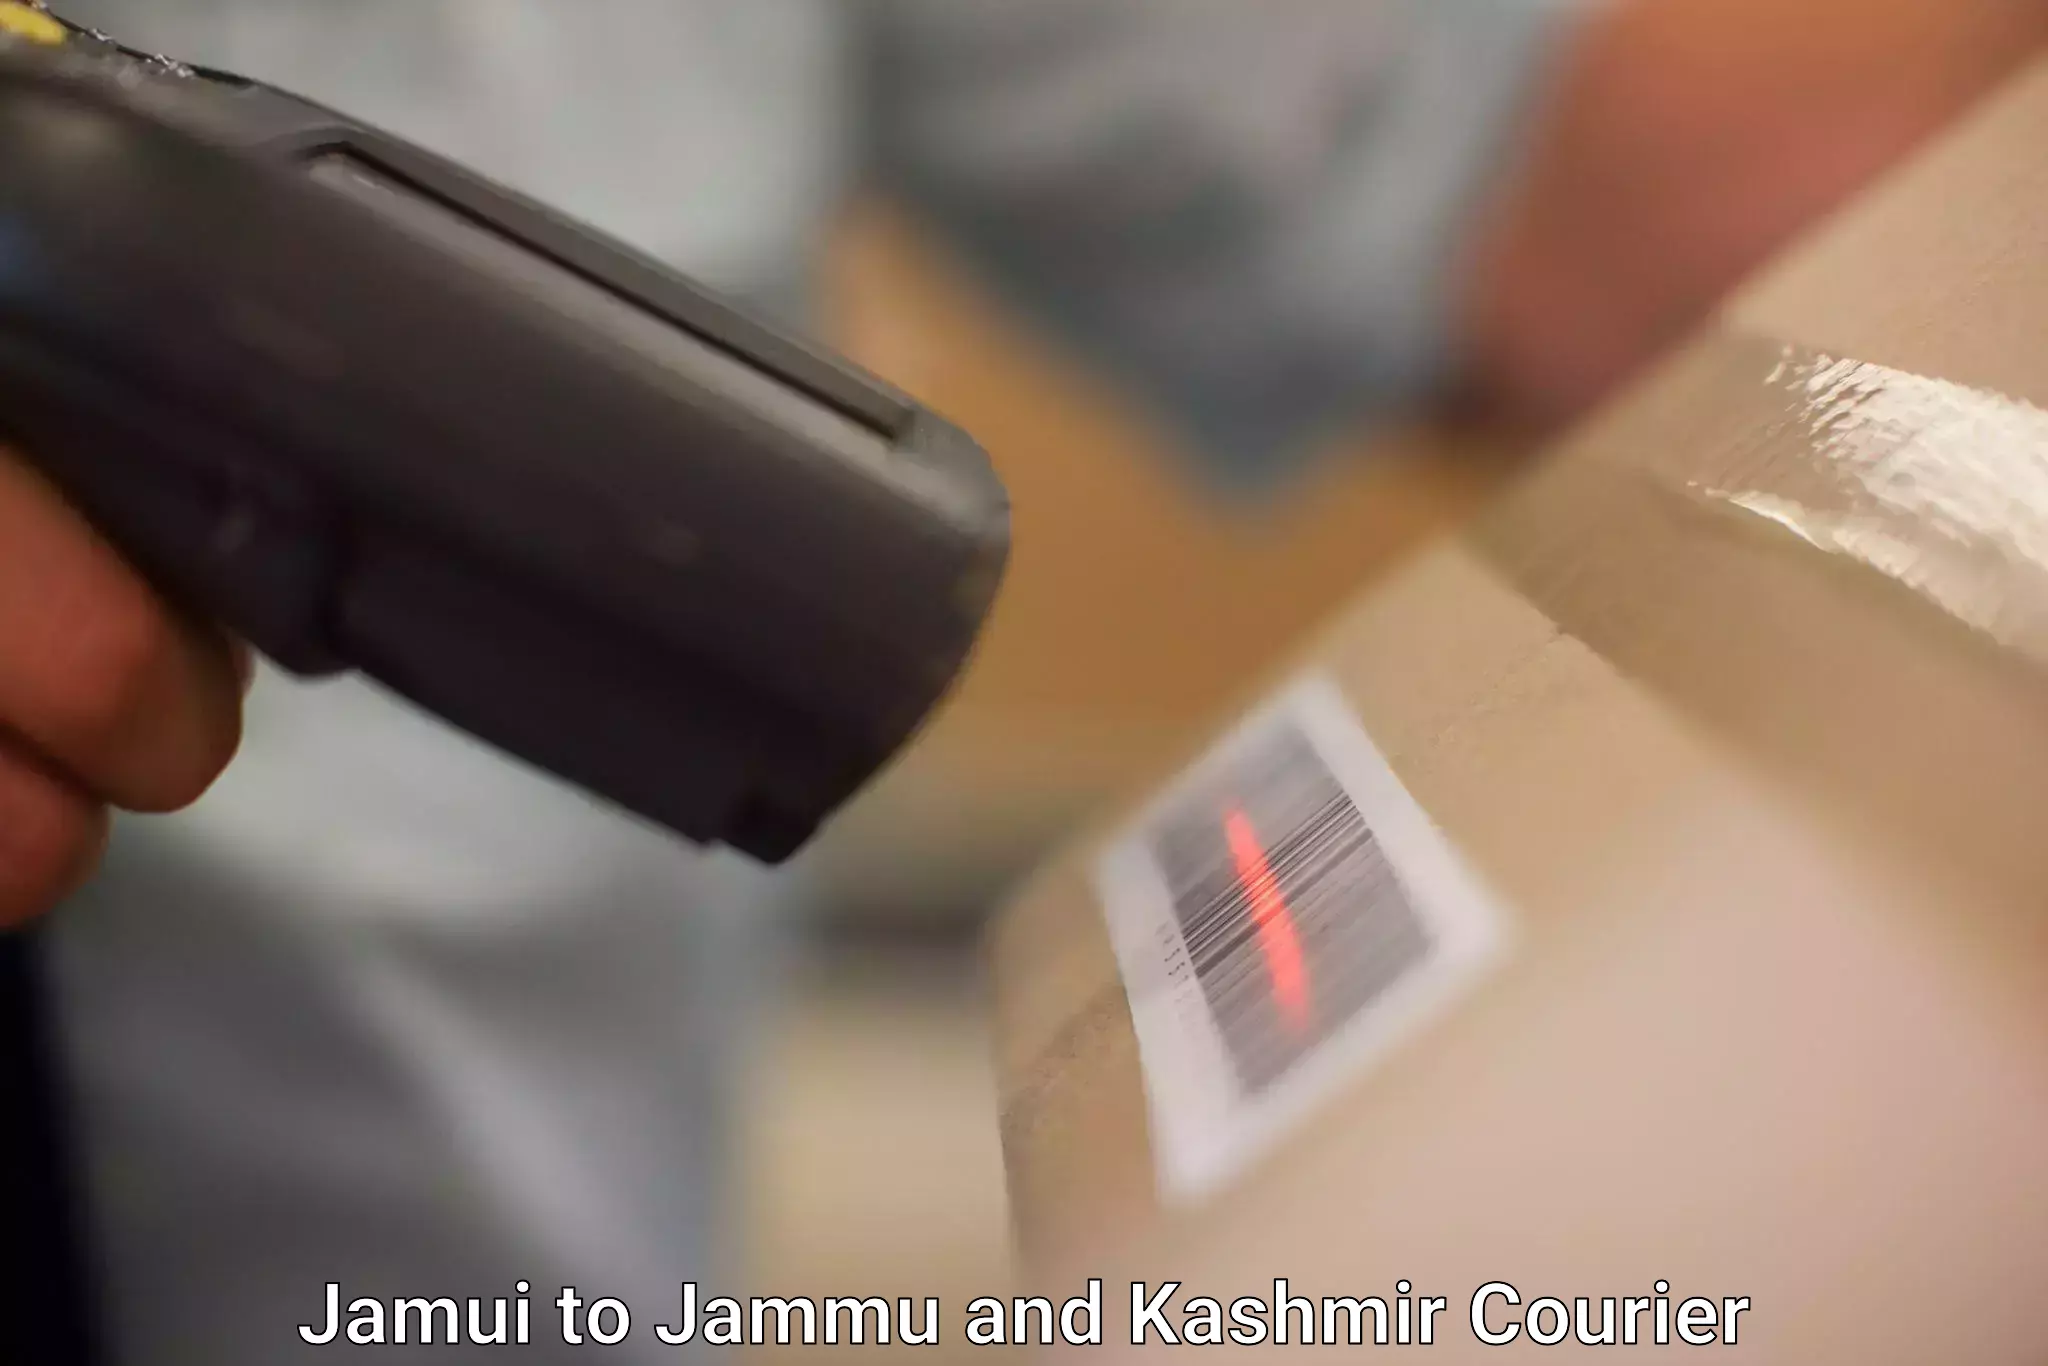 Tech-enabled shipping in Jamui to Katra